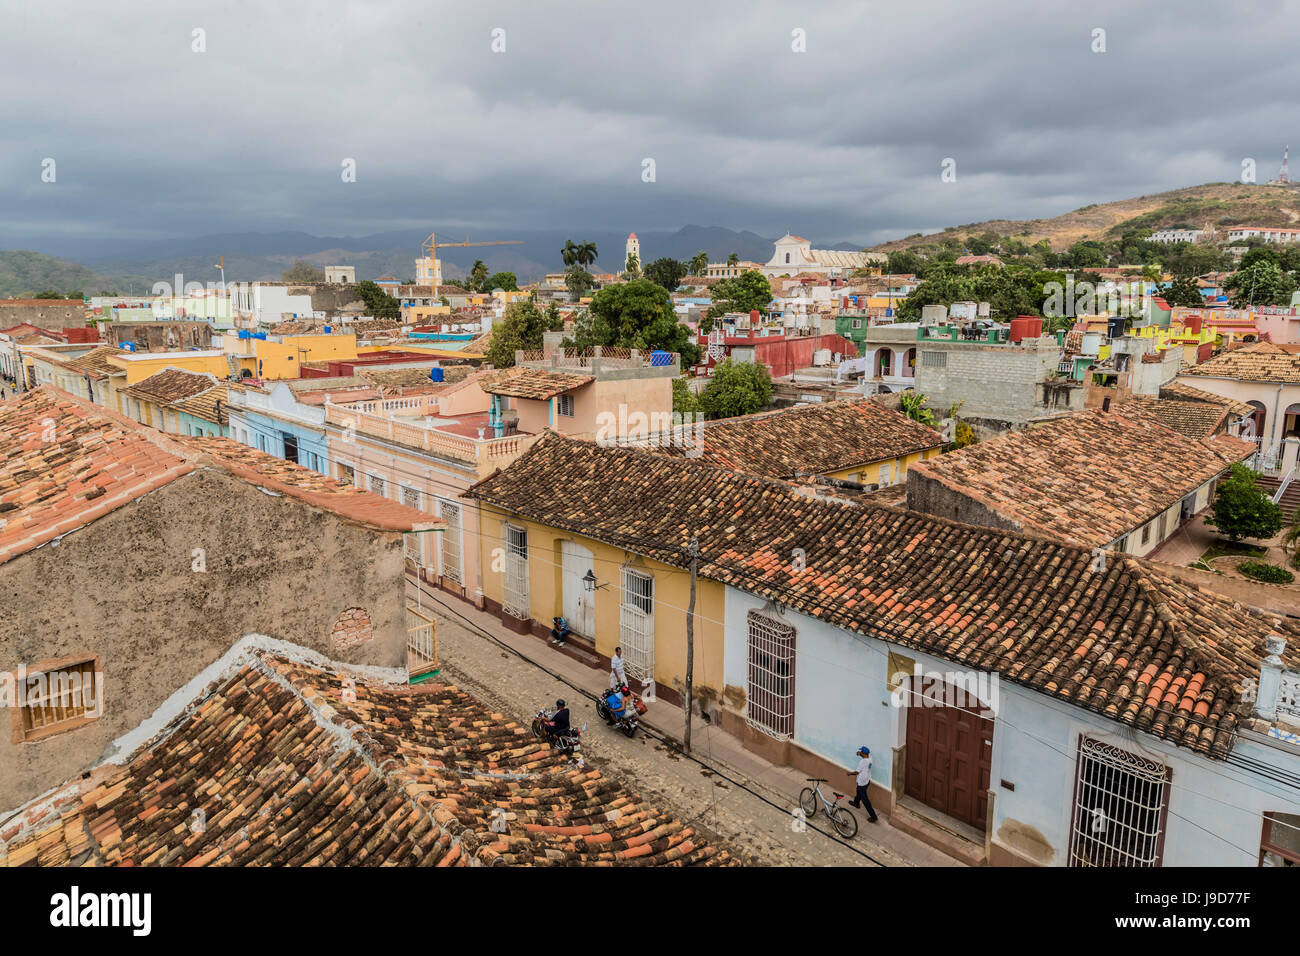 A view of the Plaza Mayor, Trinidad, UNESCO World Heritage Site, Cuba, West Indies, Caribbean, Central America Stock Photo